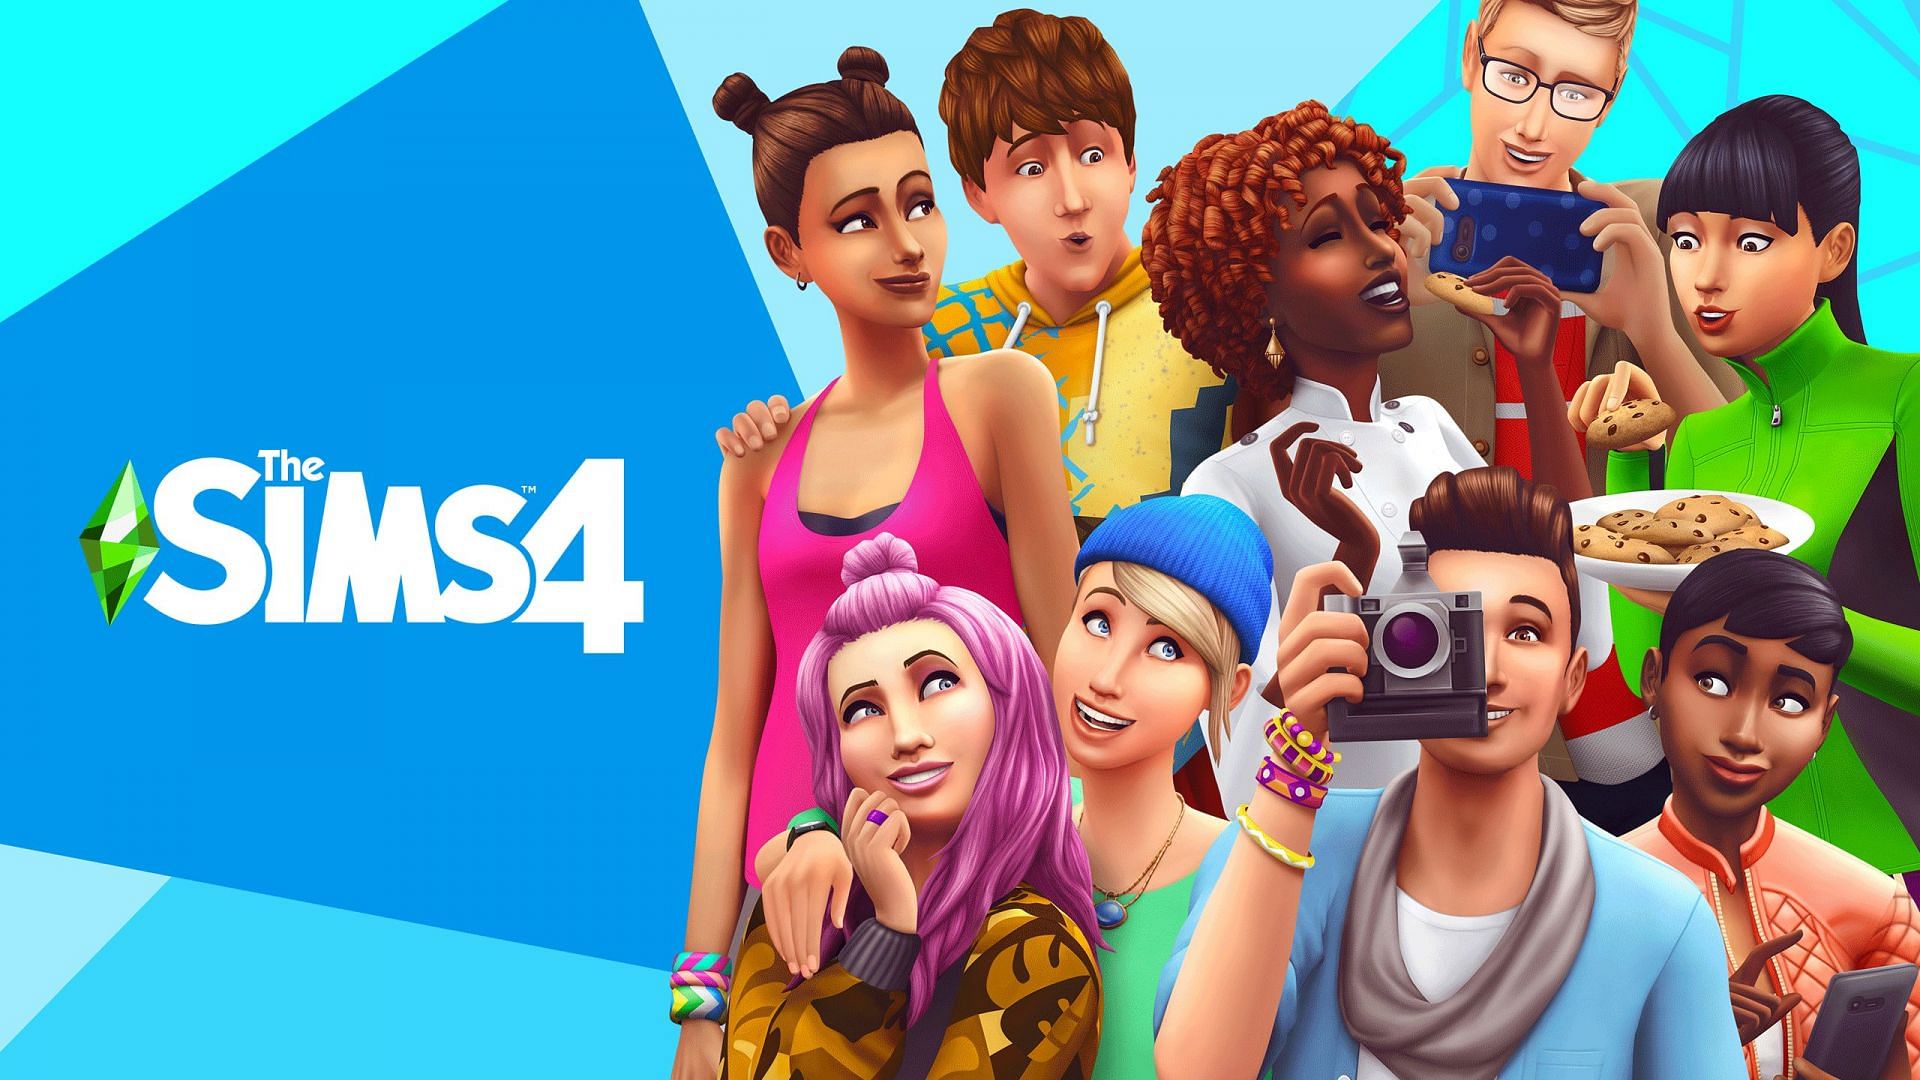 The Sims 4 (Image via Epic Games Store)